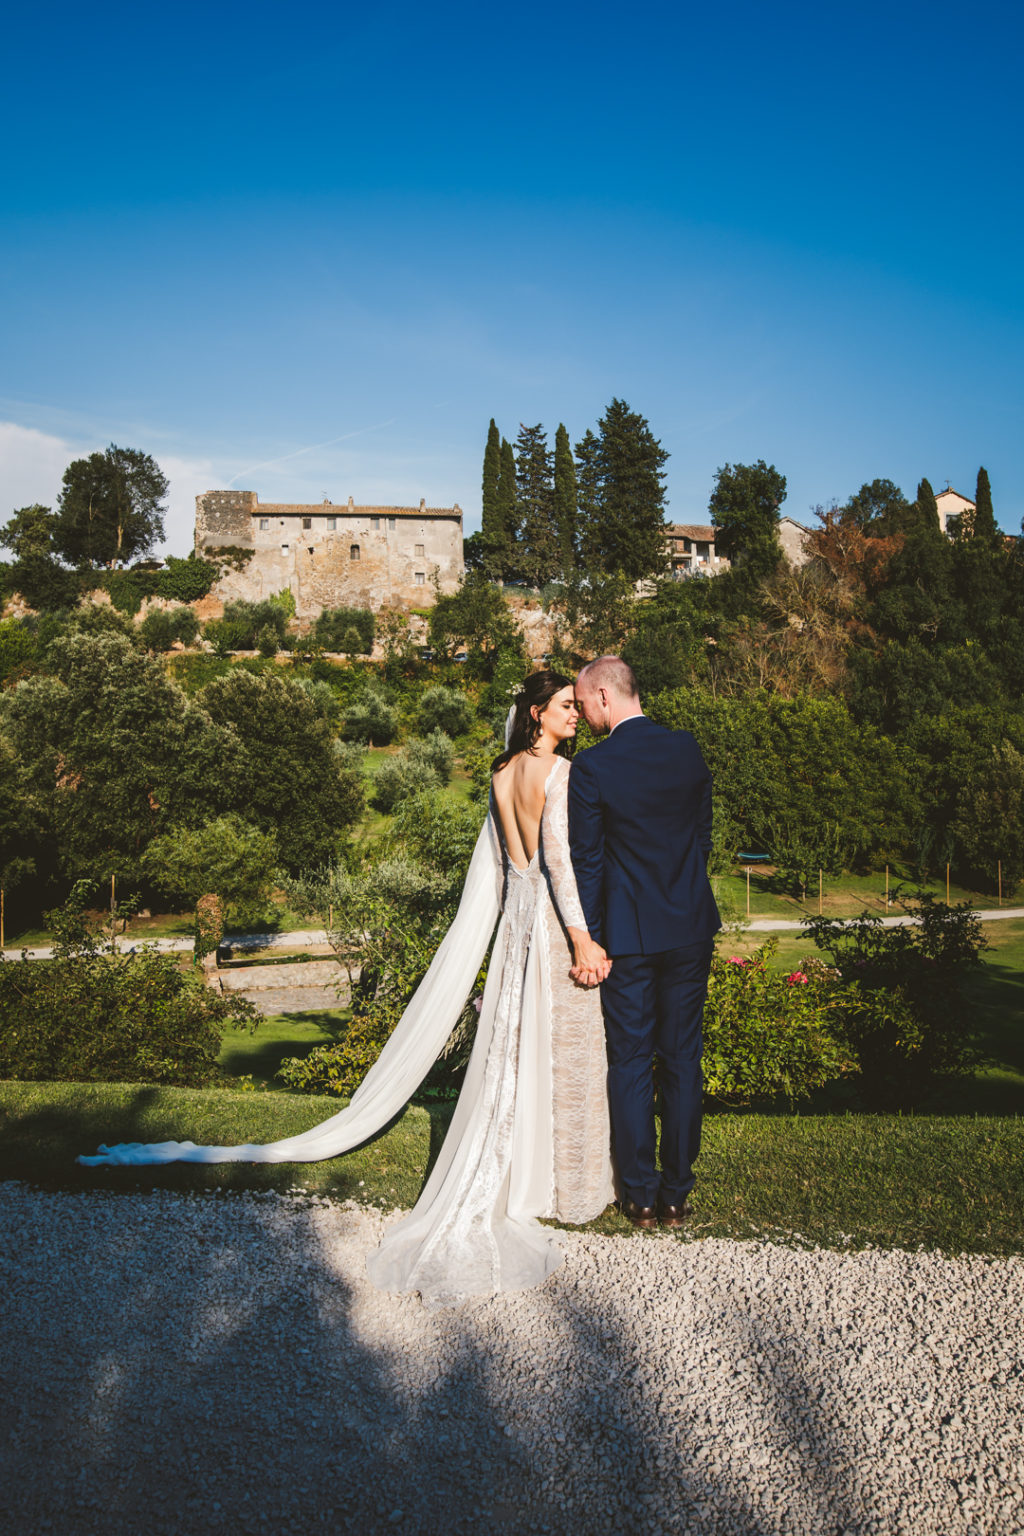 This romantic wedding took place in Italy, it was filled with cool music and with tasty Italian food